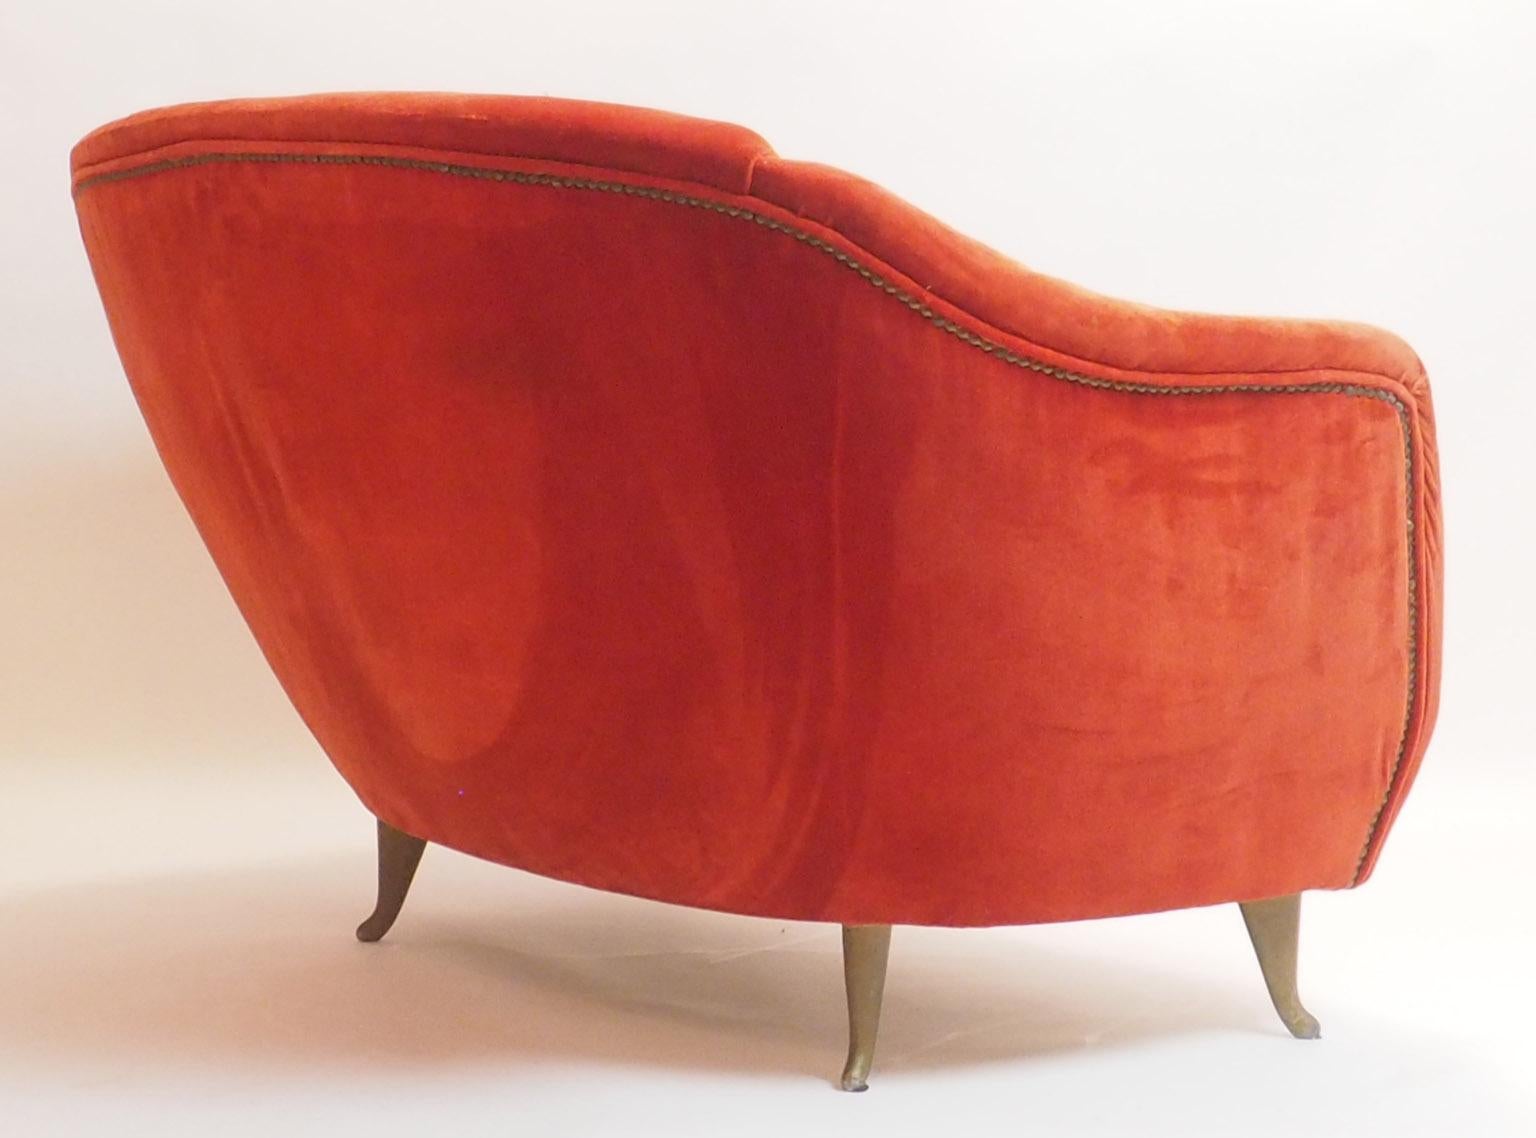 Fine Velvet Sofa with Brass Feet attributed to Gio Ponti for ISA, Italy, c. 1952 For Sale 1